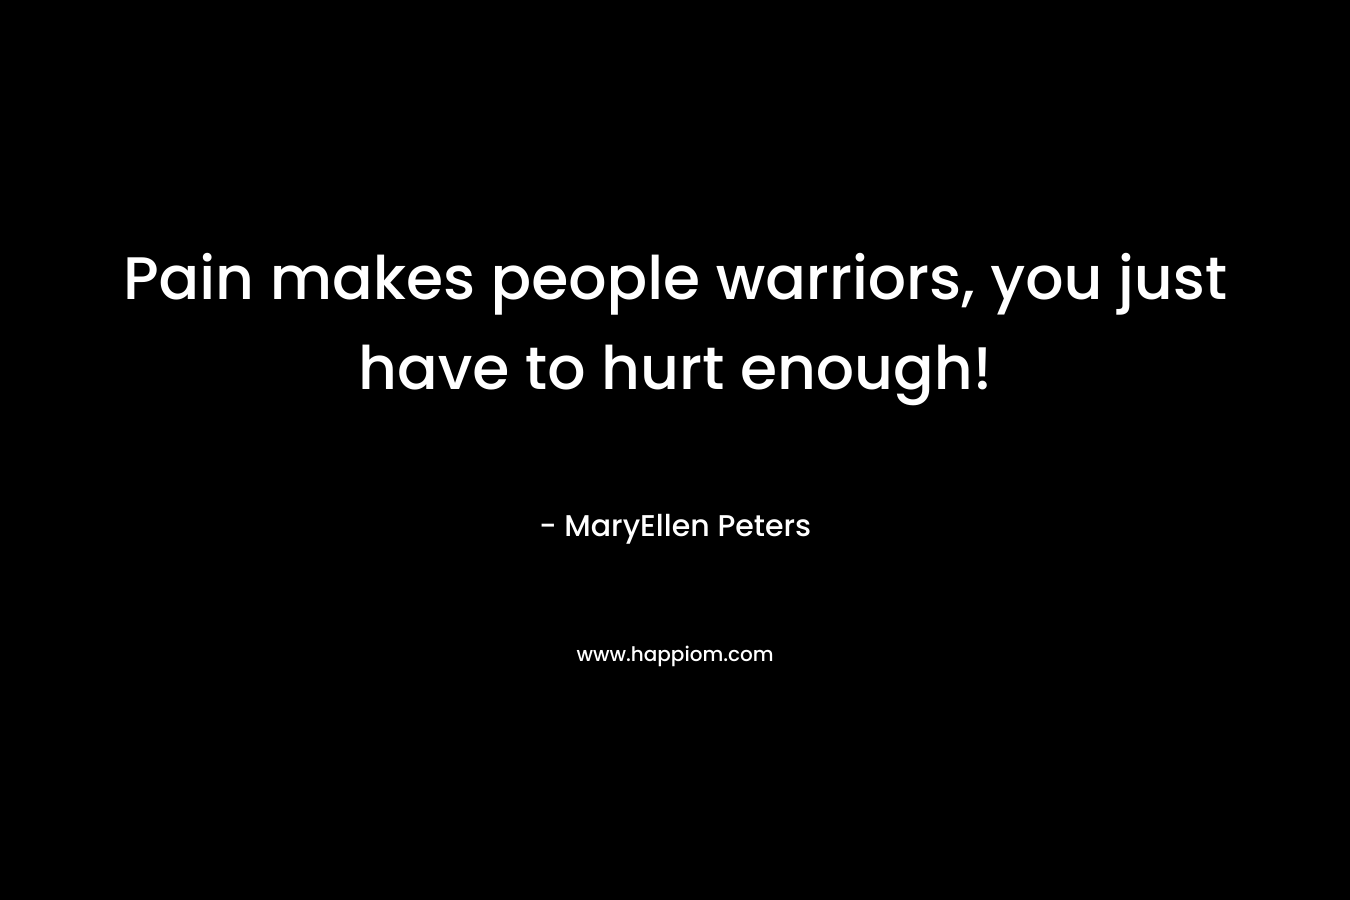 Pain makes people warriors, you just have to hurt enough!